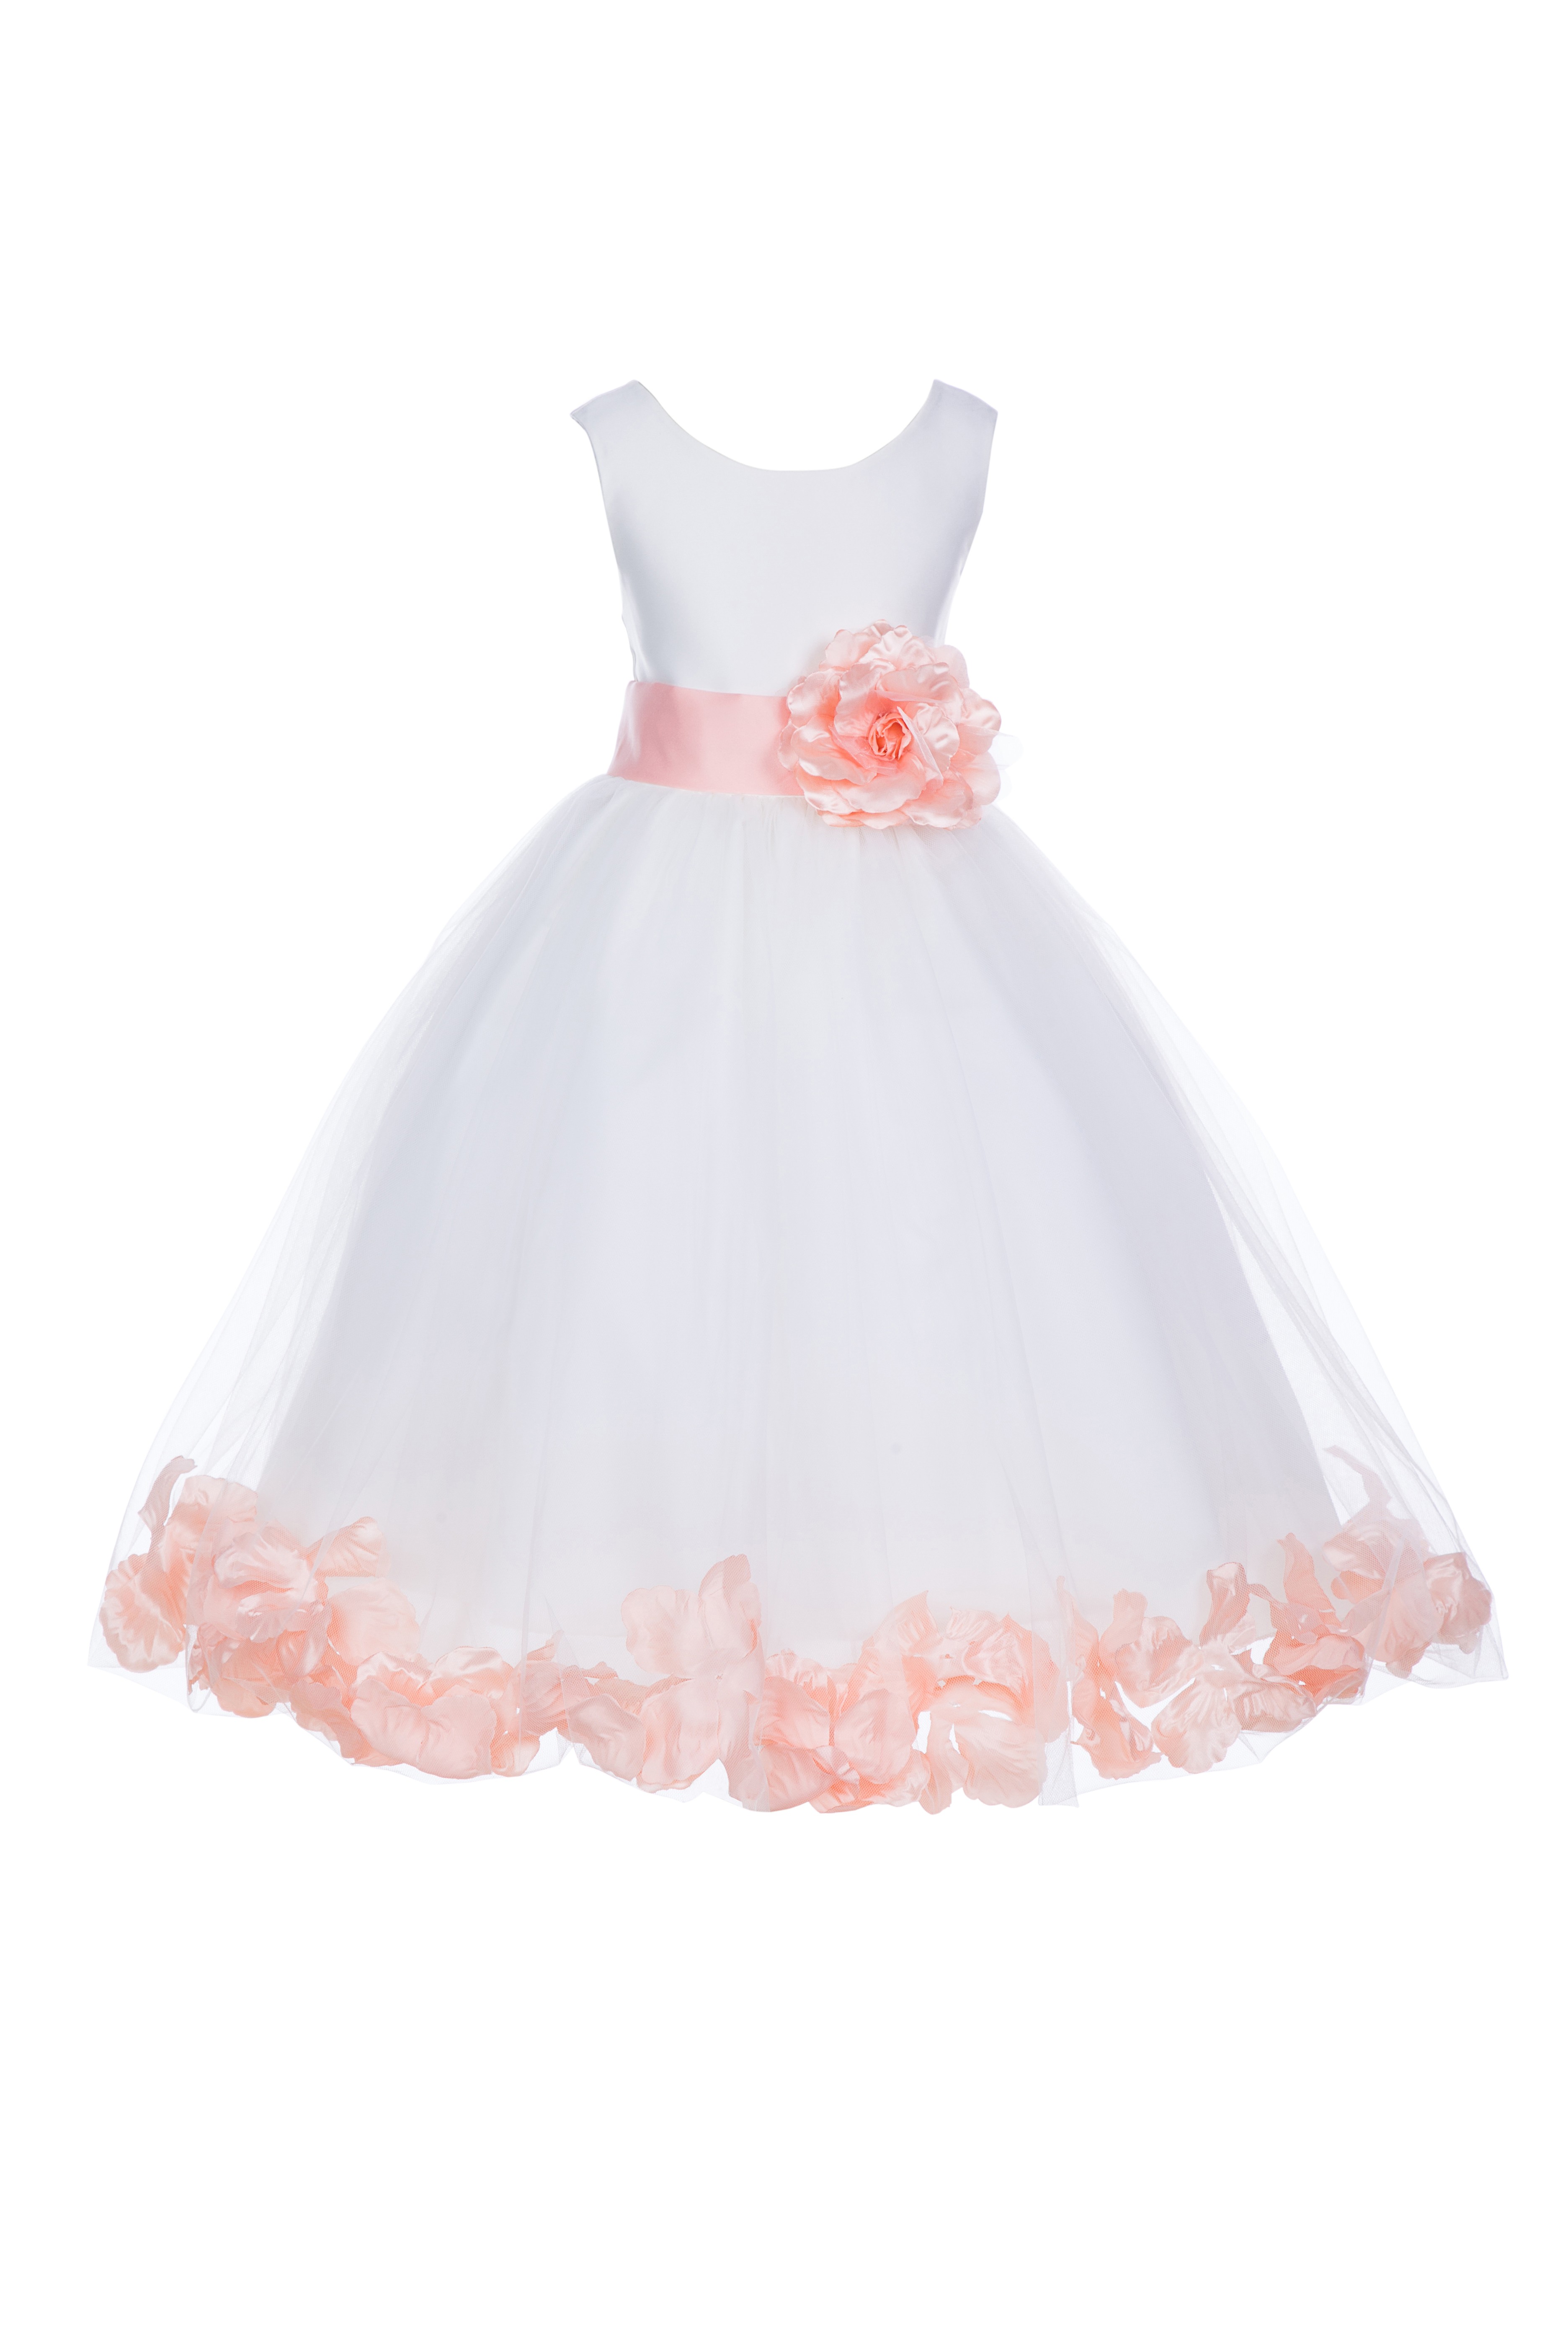 Ivory/Peach Tulle Rose Petals Flower Girl Dress Pageant 302S